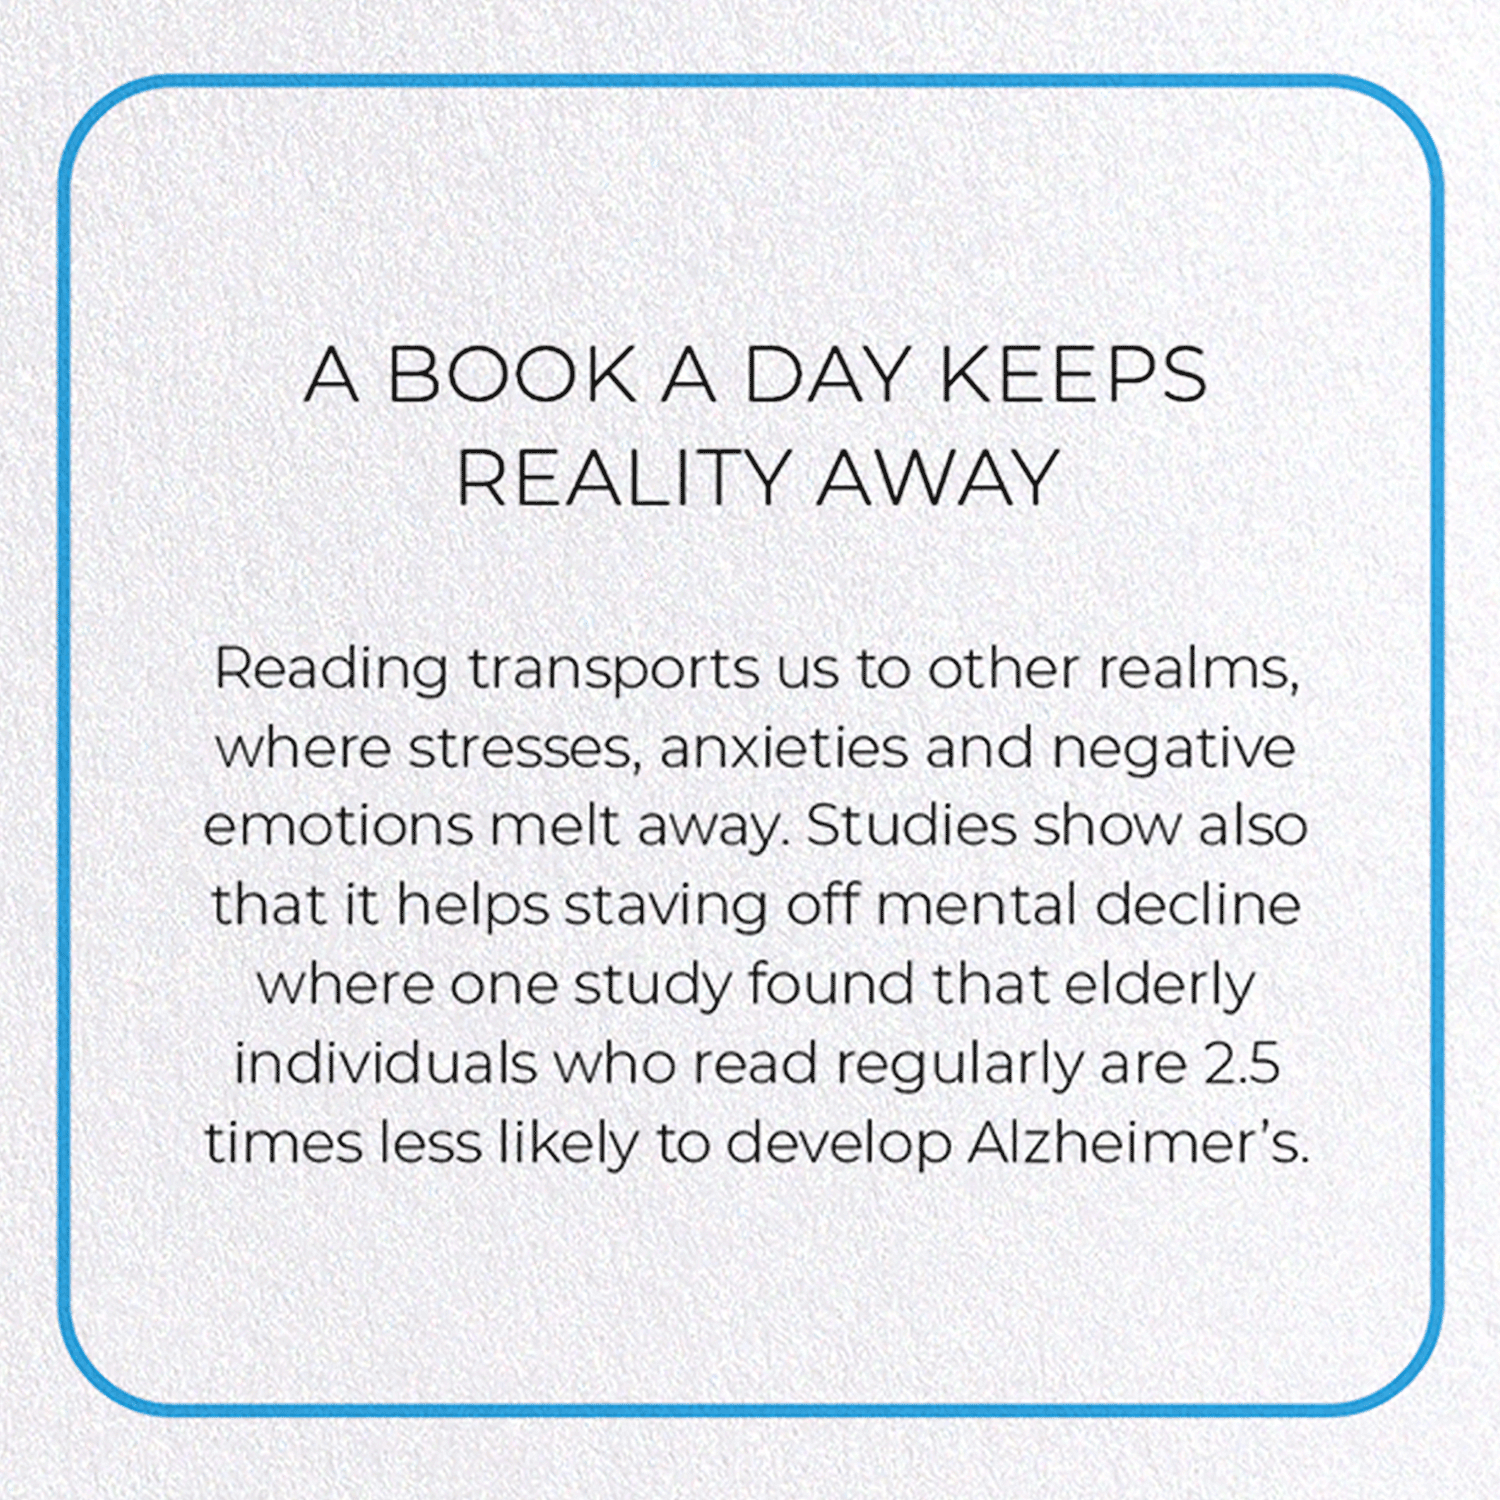 A BOOK A DAY KEEPS REALITY AWAY